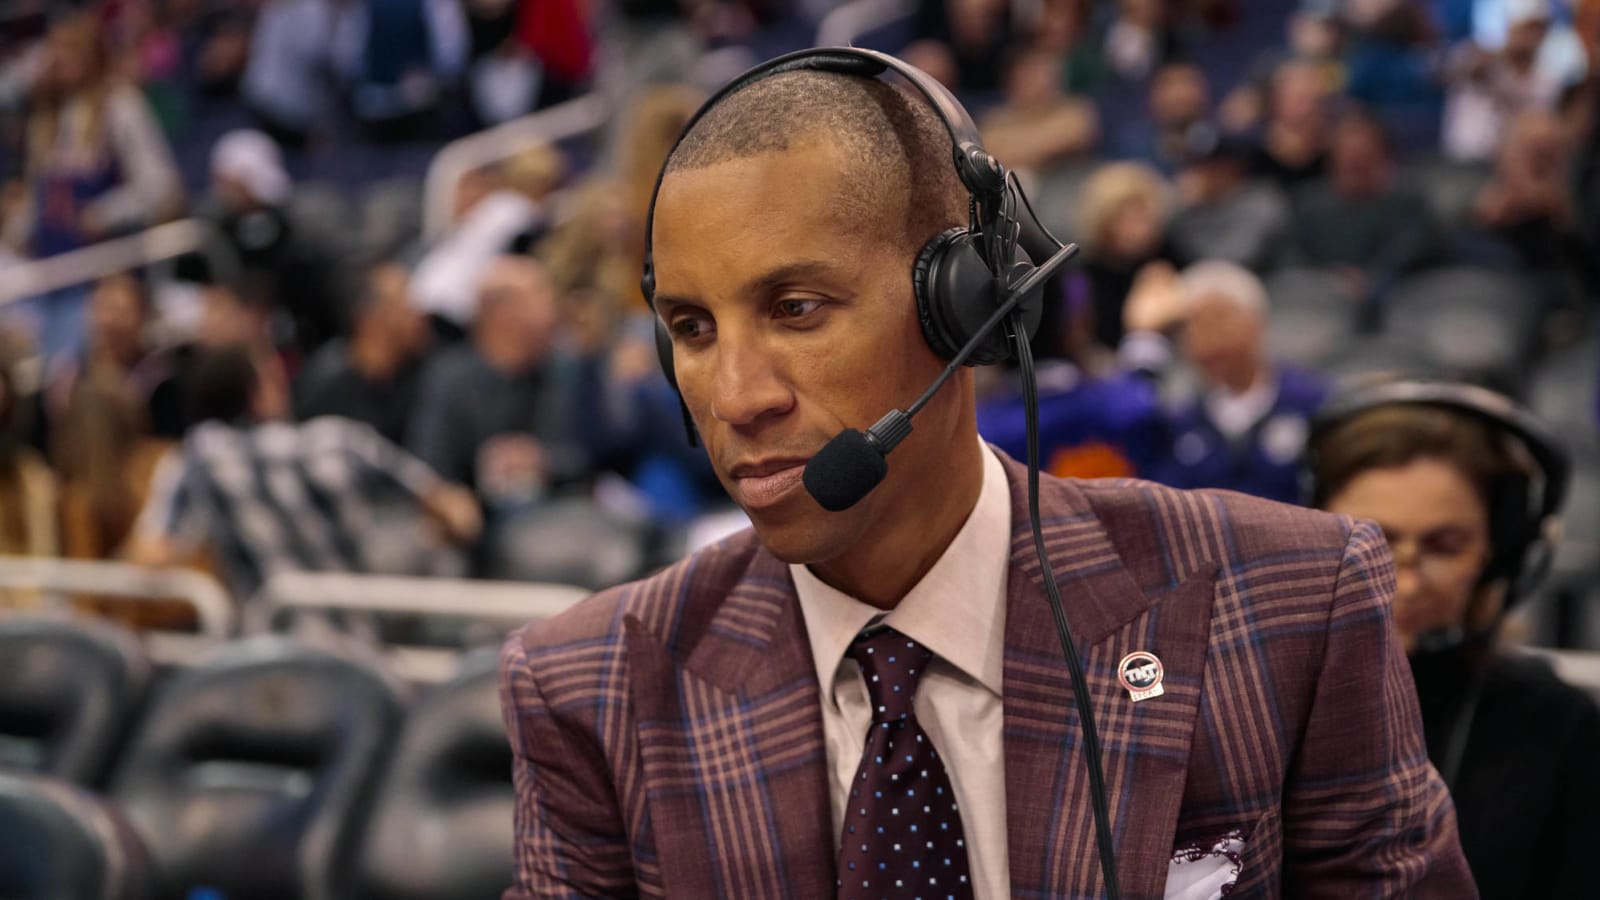 Reggie Miller shares classy message to Steph Curry on passing him for threes